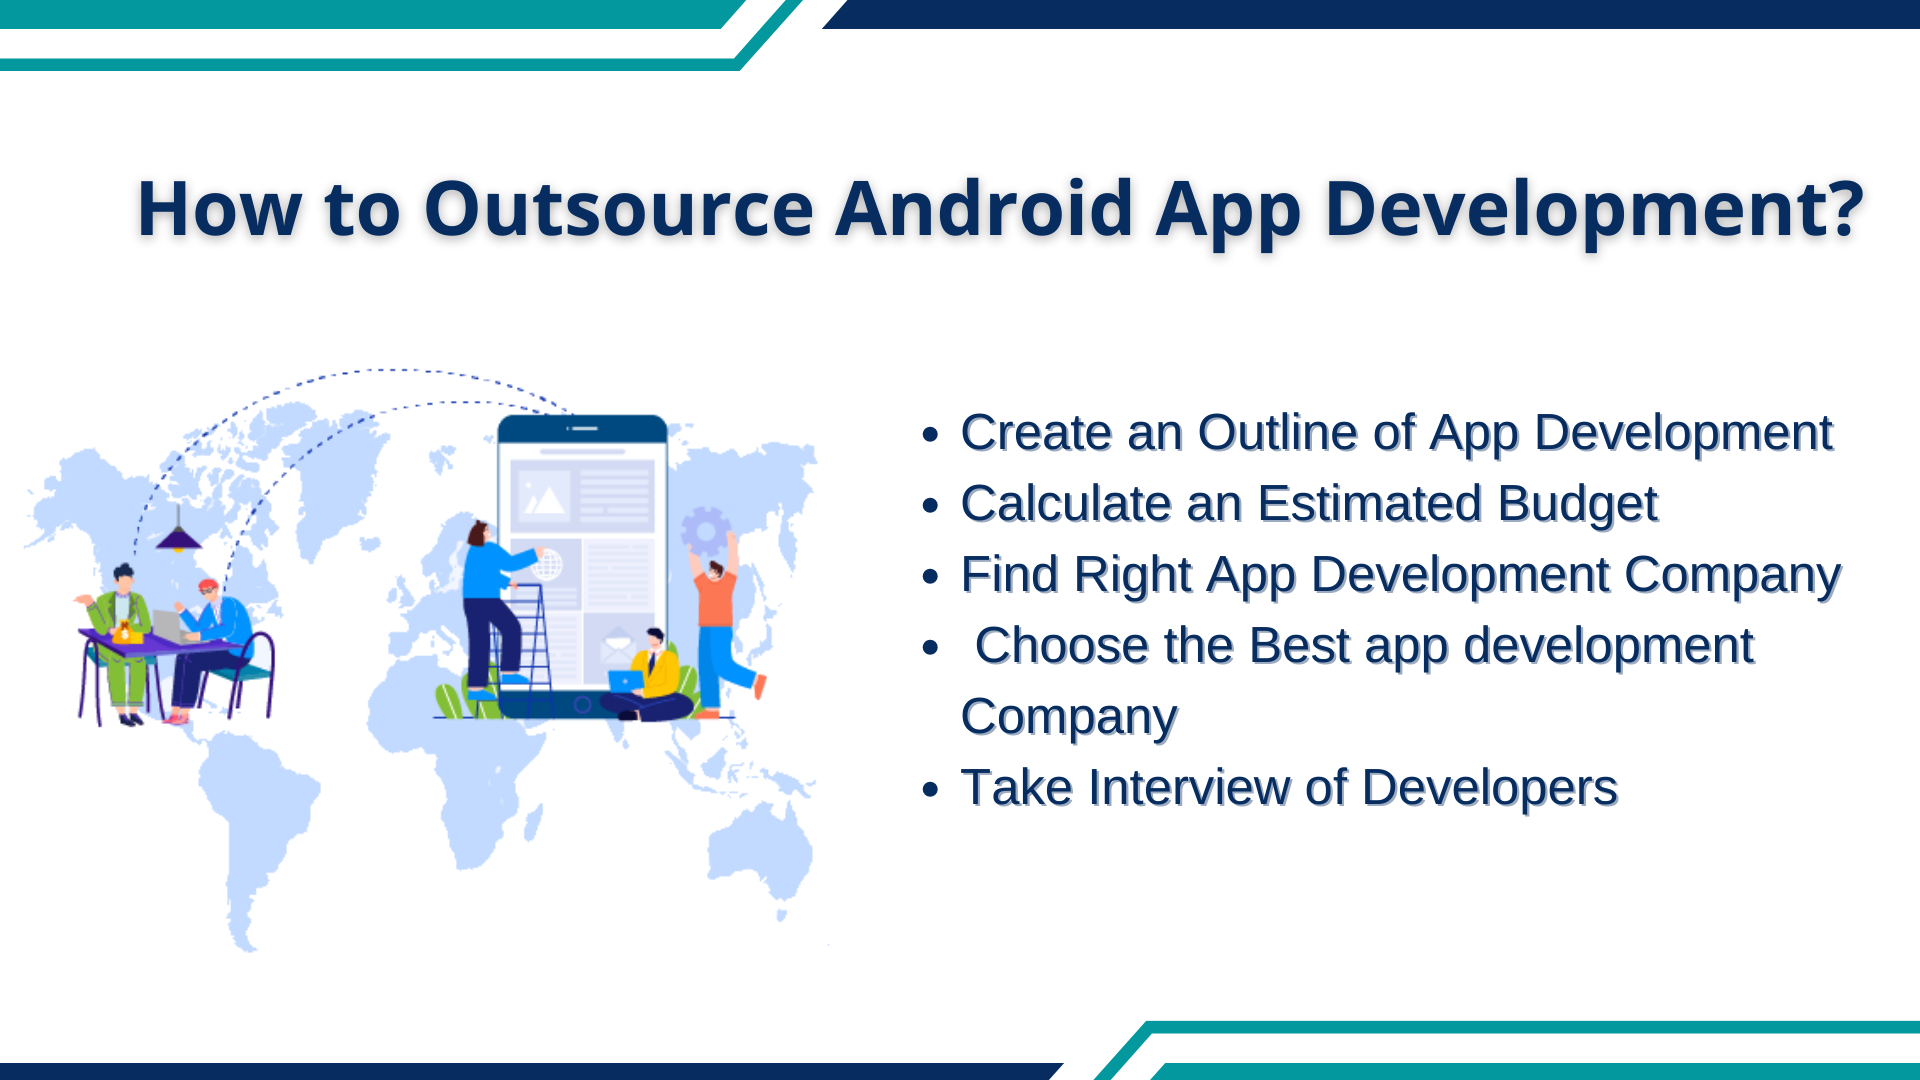 <img src="How-to-Outsource-Android-App-Development.png" alt="How to Outsource Android App Development?">